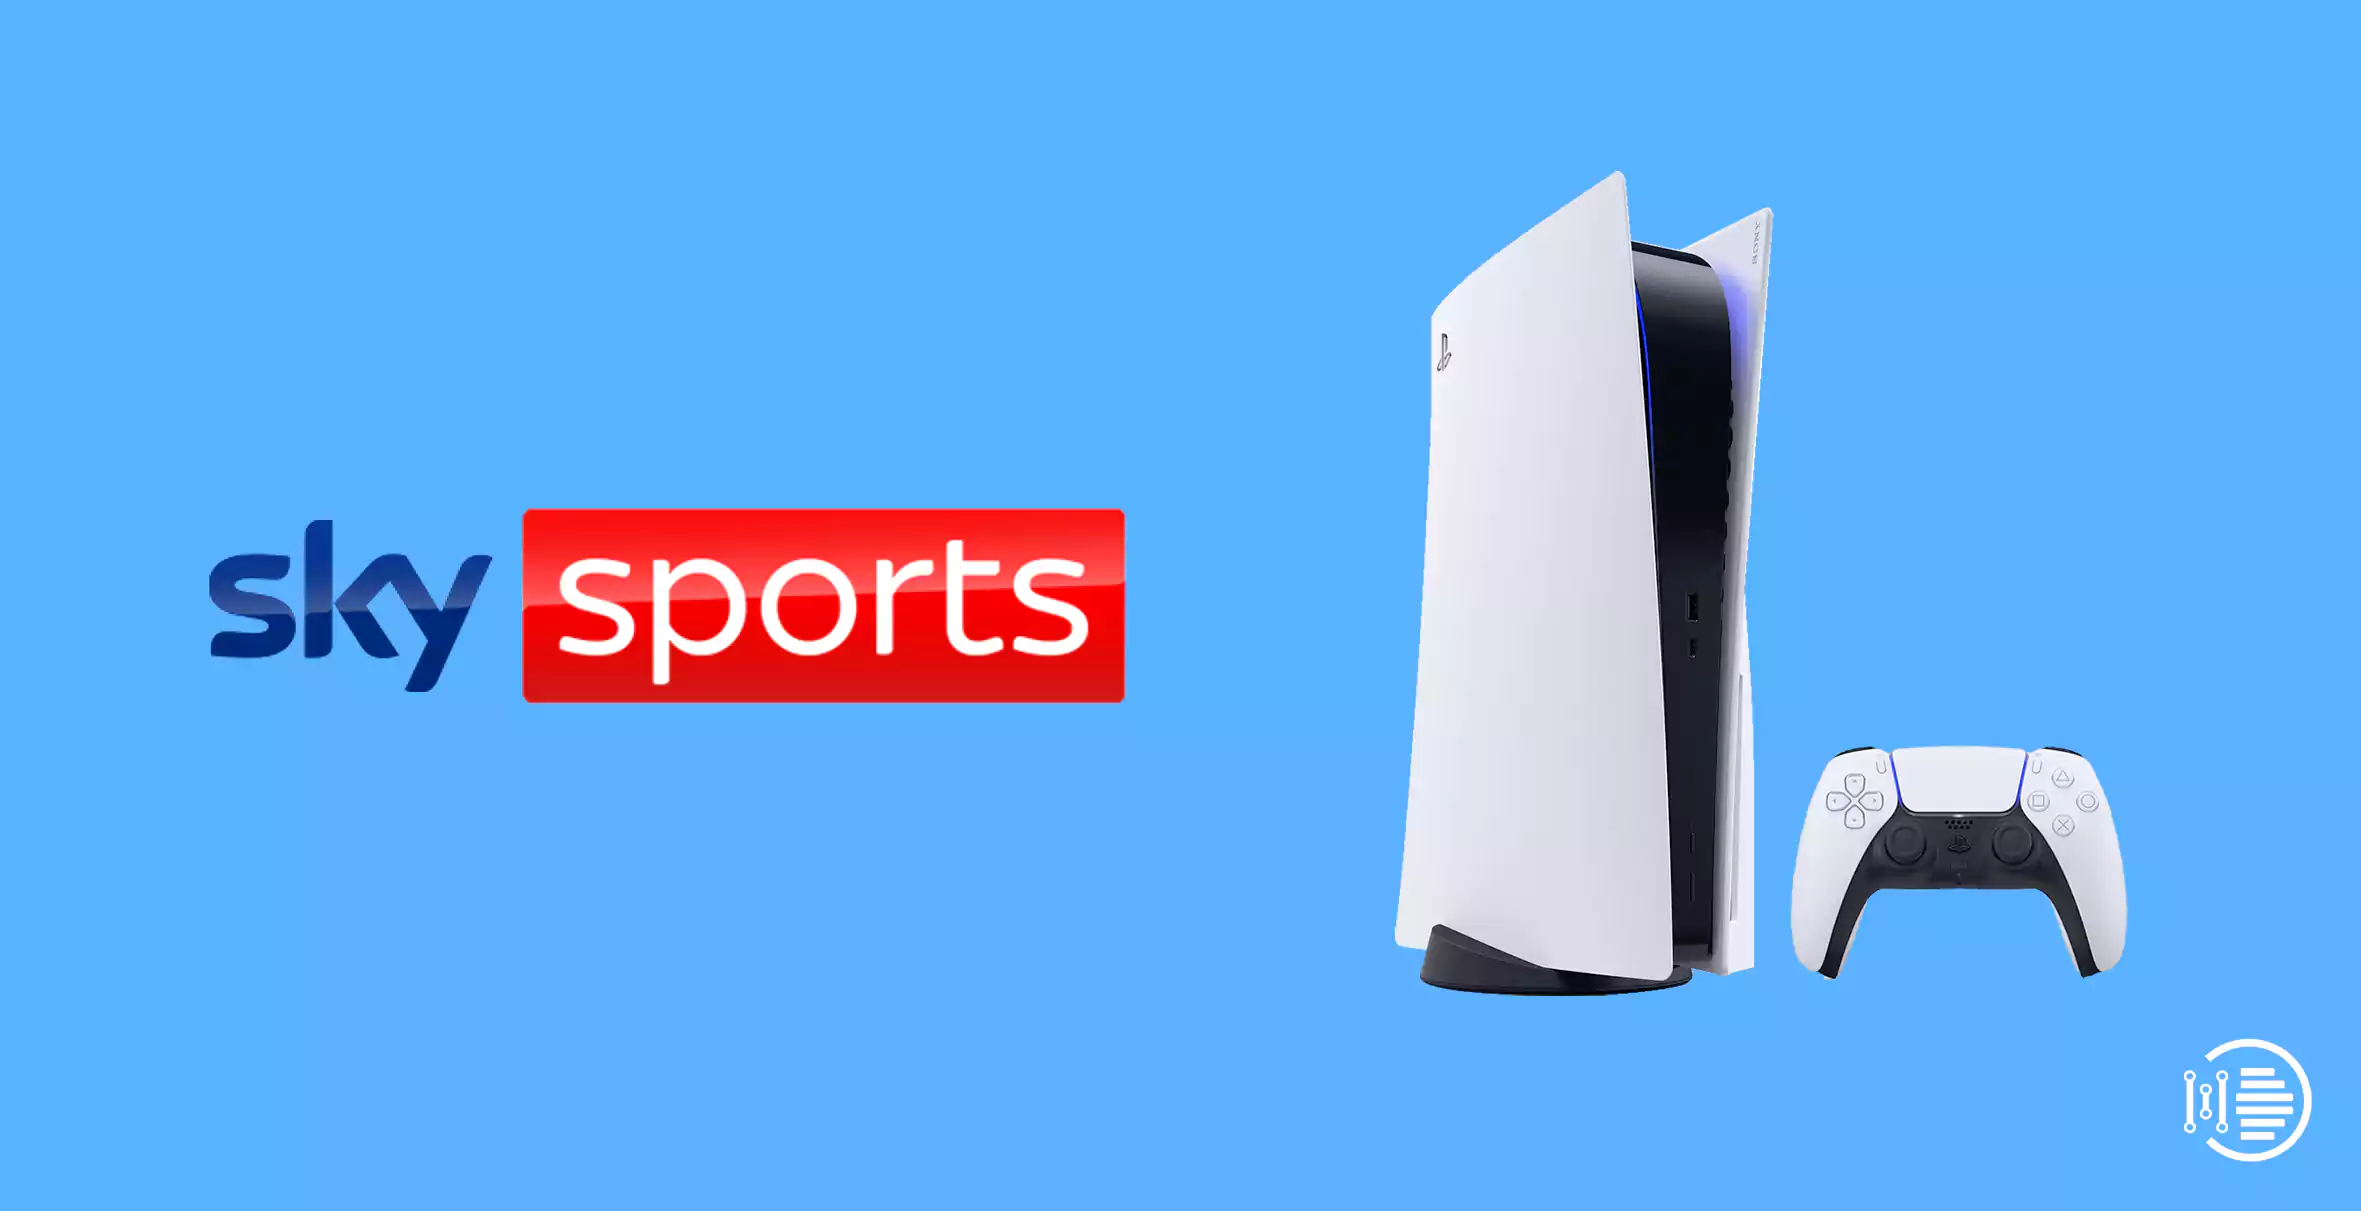 How to Watch Sky Sports on PS5 in 2022